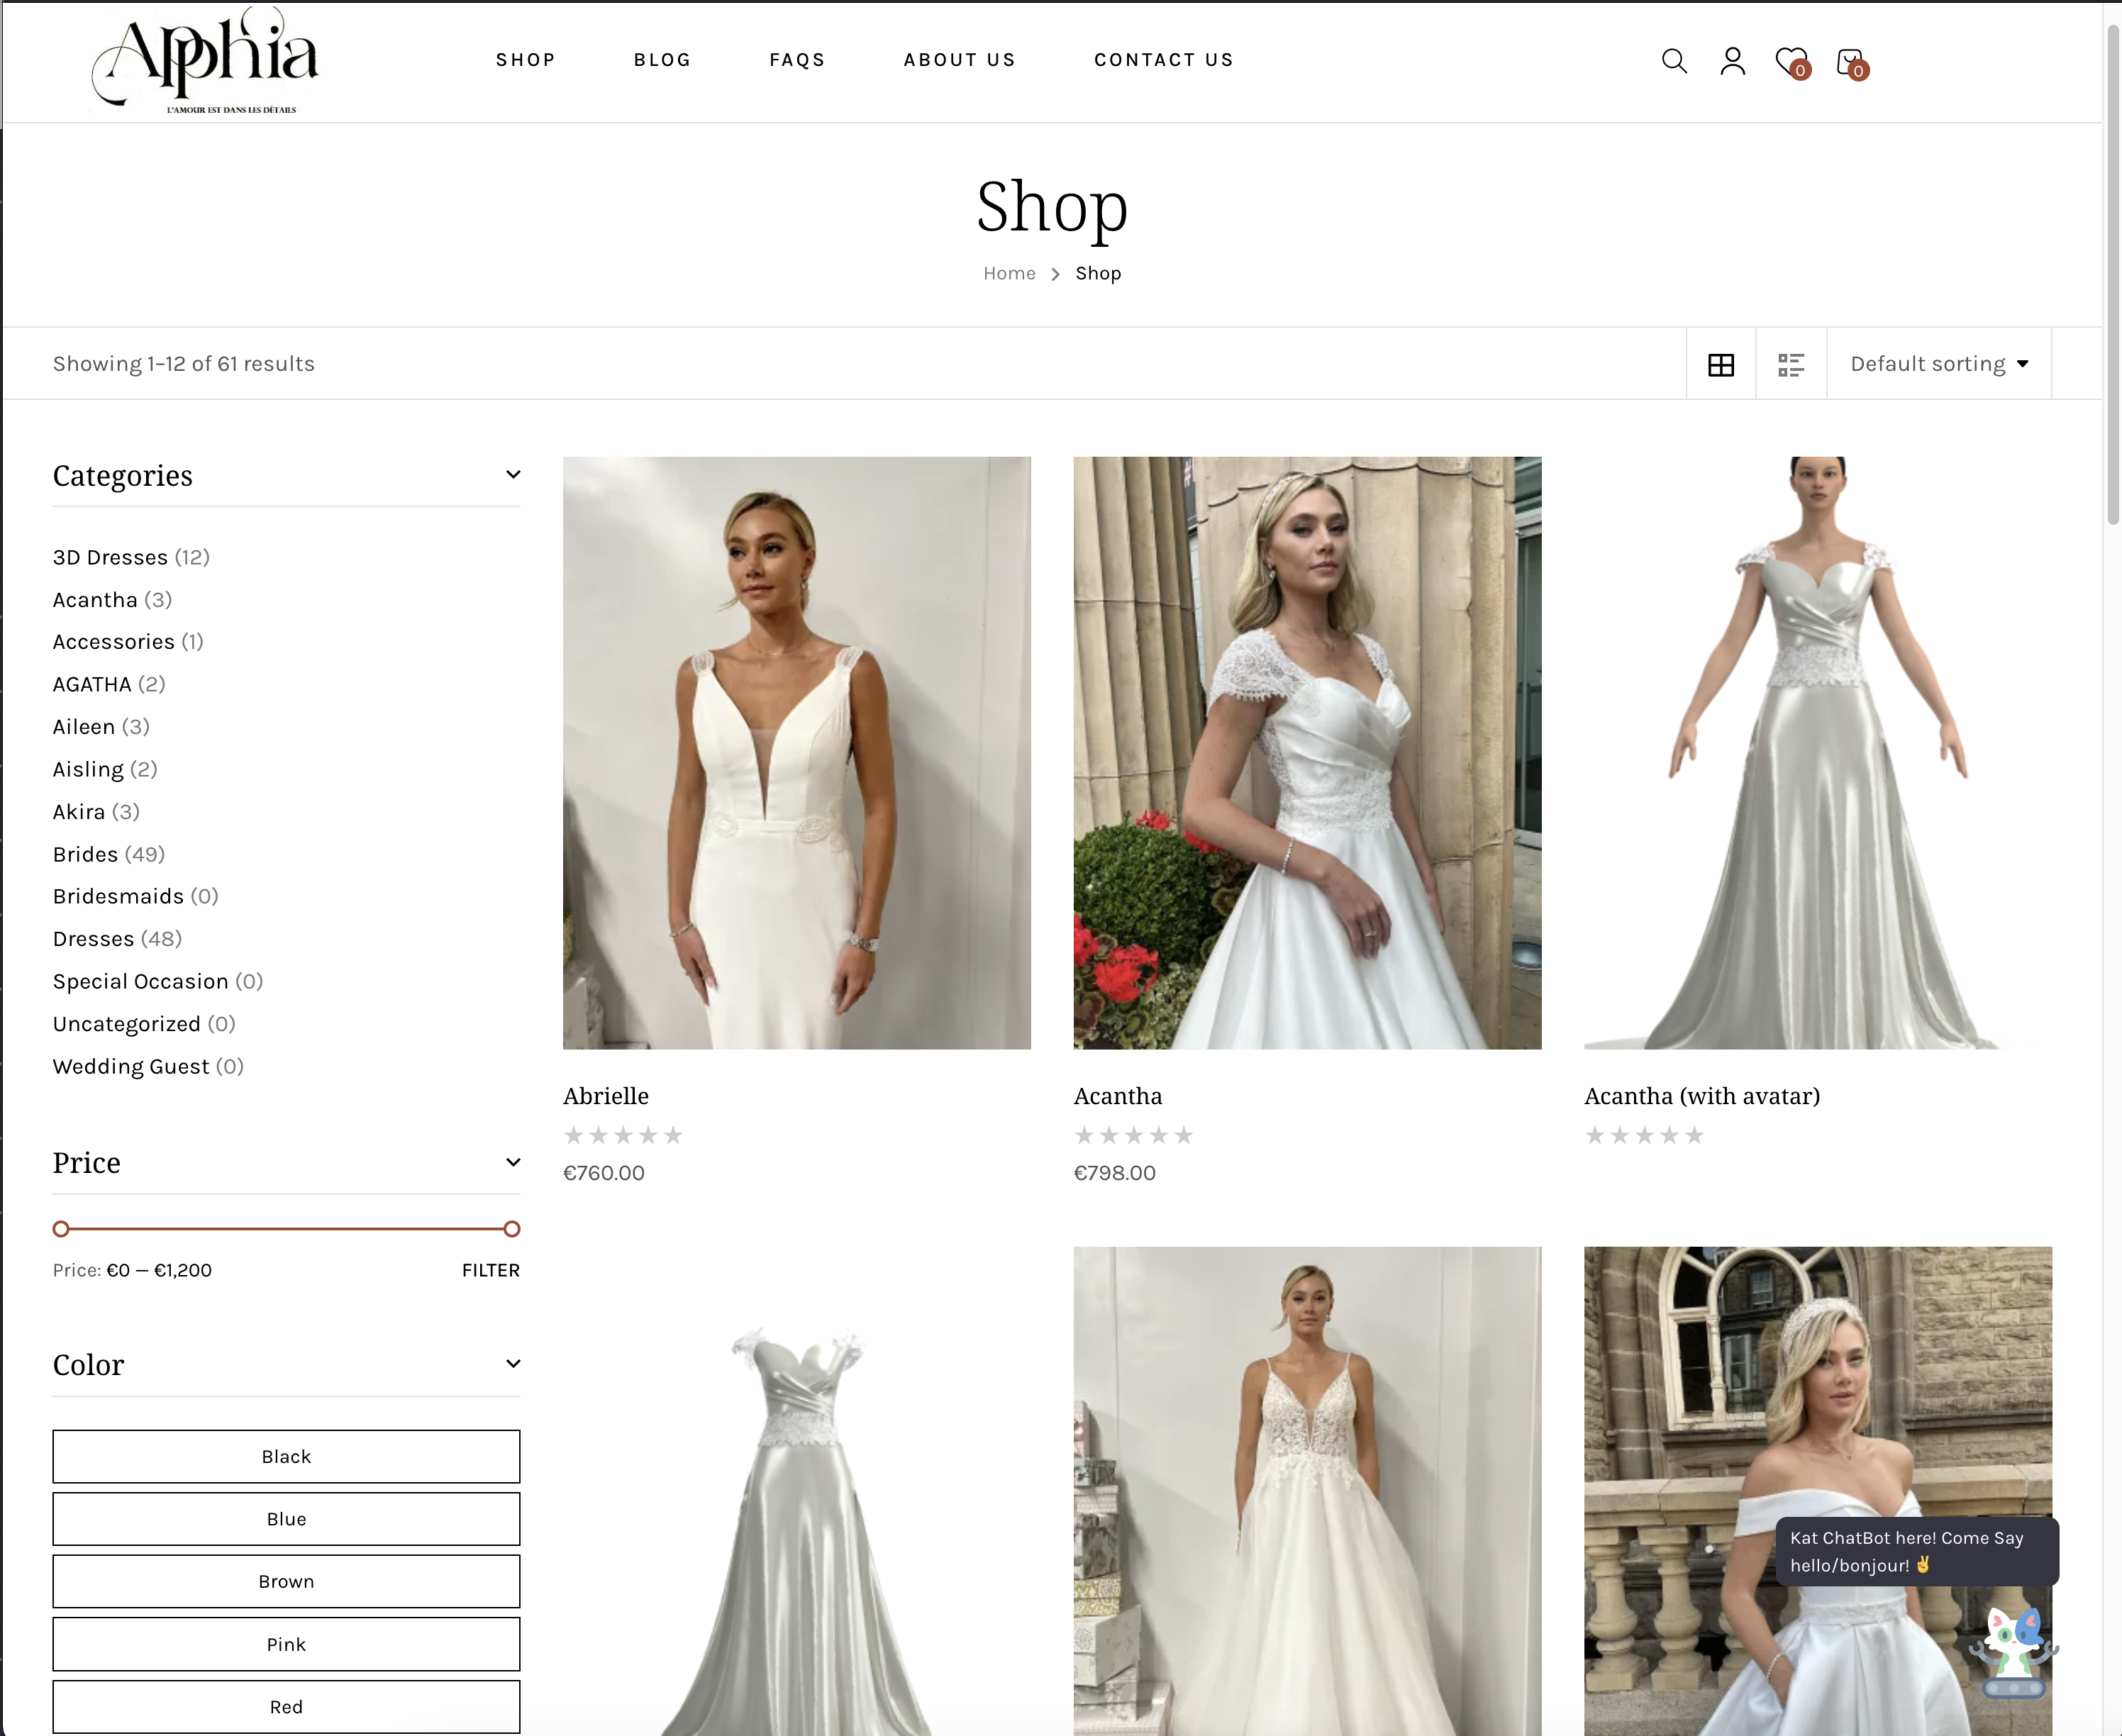 Unelma Platforms Revolutionizes the Bridal Industry with a State-of-the-Art e-Commerce Platform for ApphiaWedding